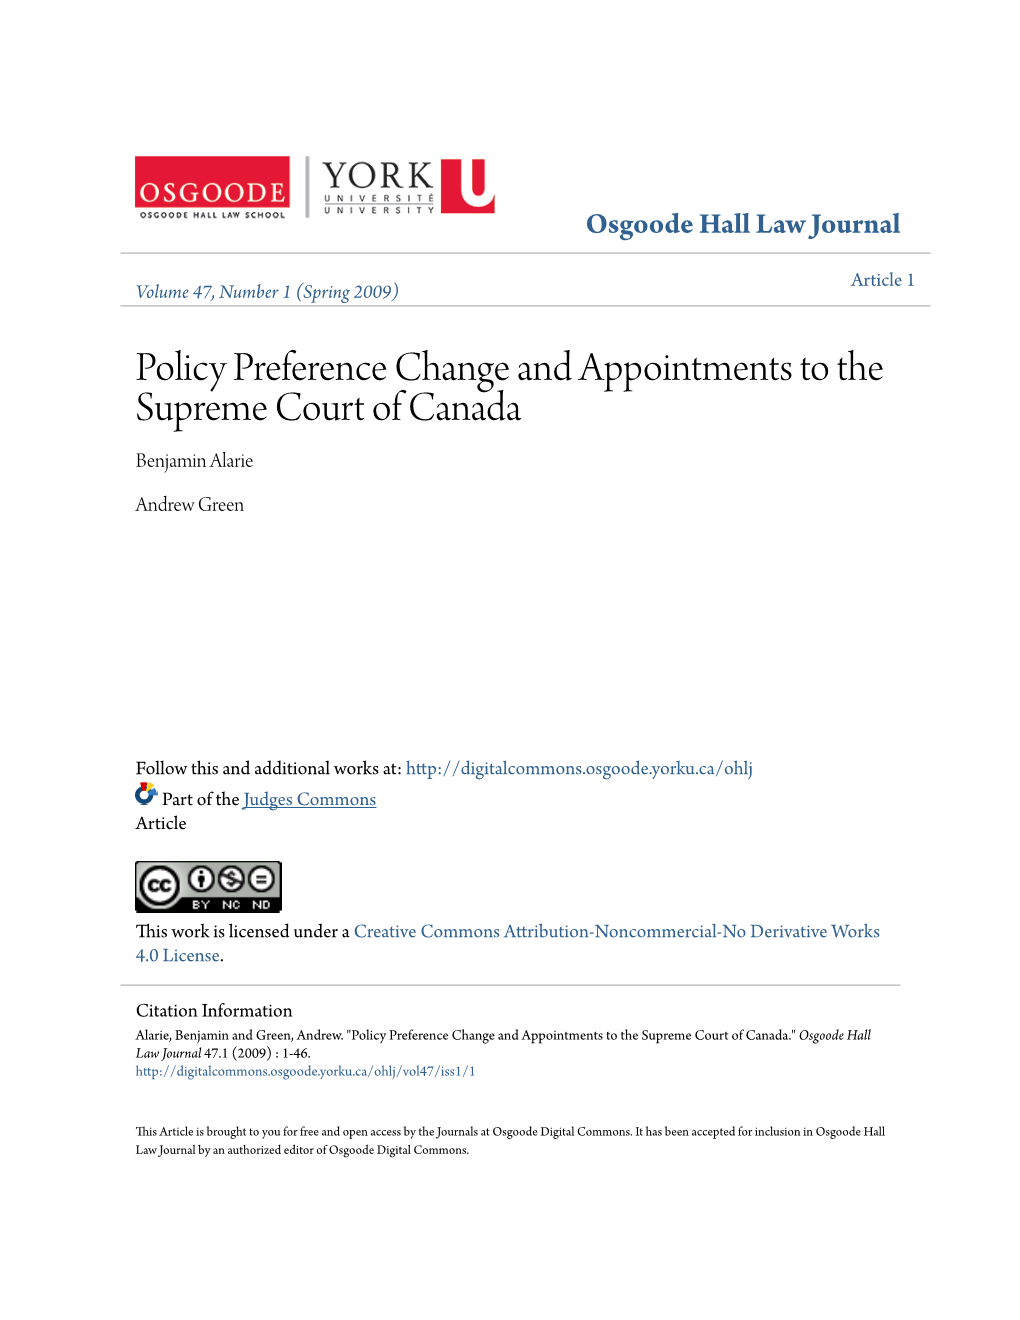 Policy Preference Change and Appointments to the Supreme Court of Canada Benjamin Alarie